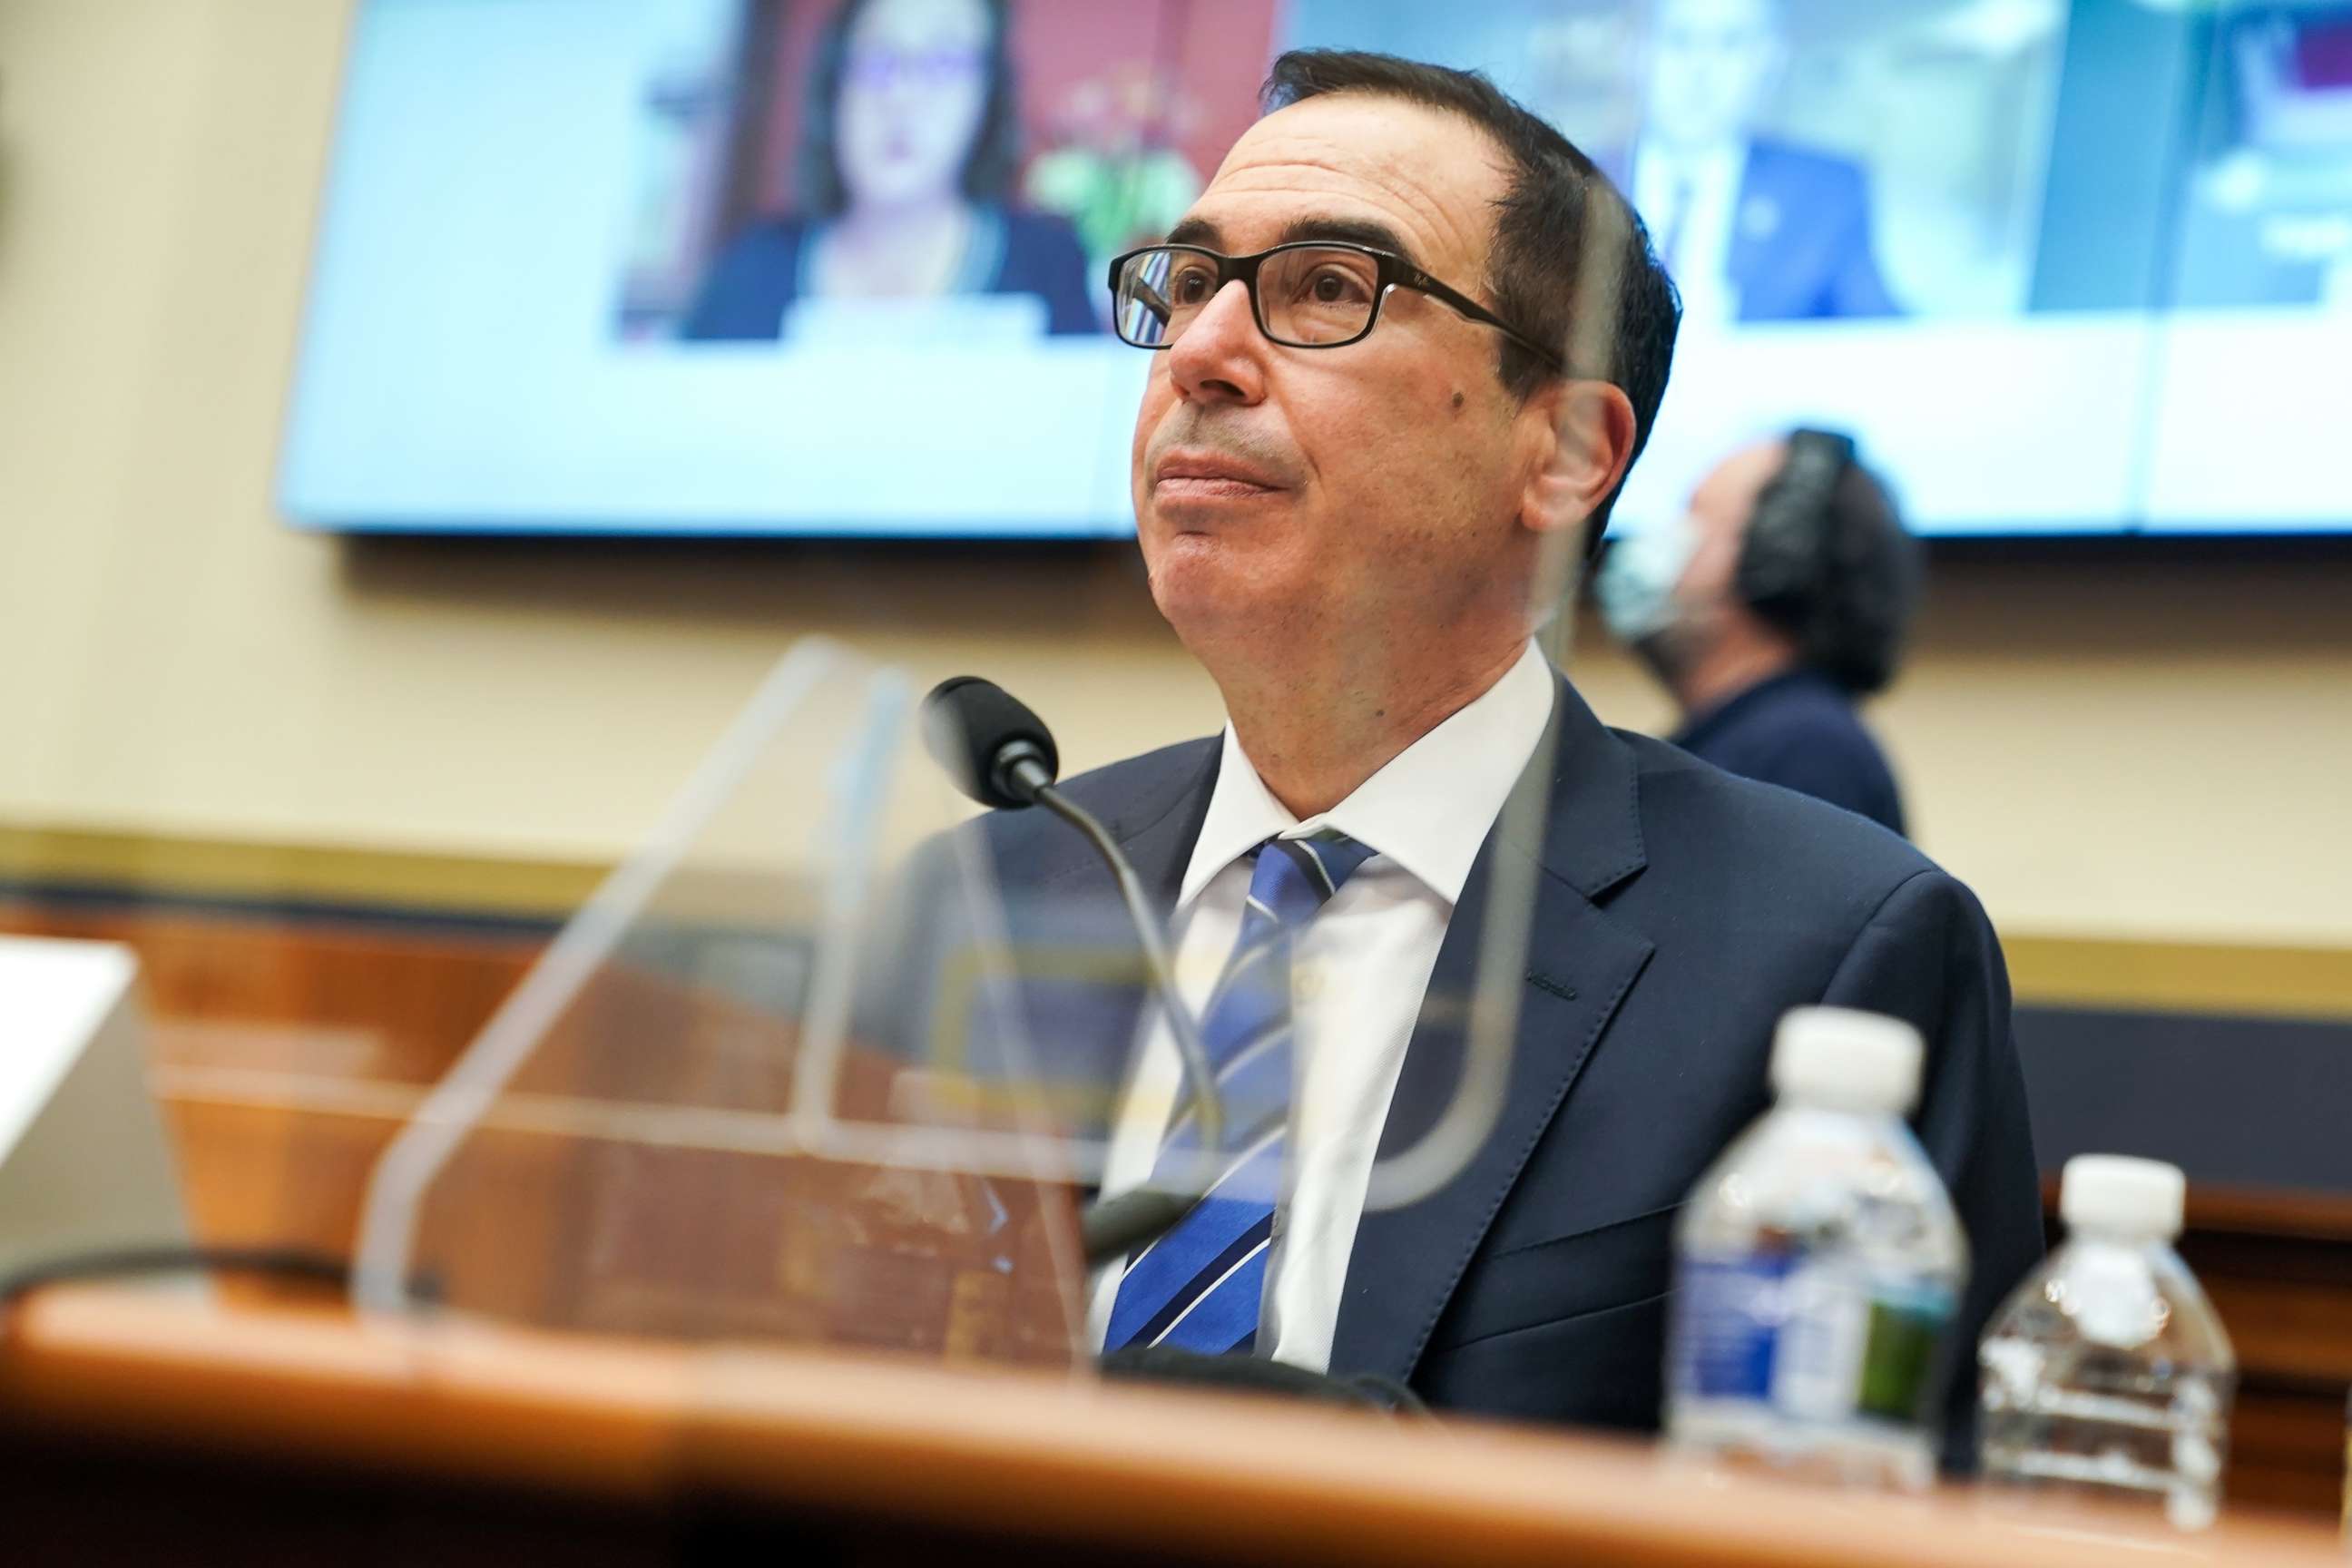 PHOTO: Treasury Secretary Steven Mnuchin listens to a question during a House Financial Services Committee oversight hearing to discuss the Treasury Department's and Federal Reserve's response to the coronavirus pandemic on Dec. 02, 2020 in Washington.